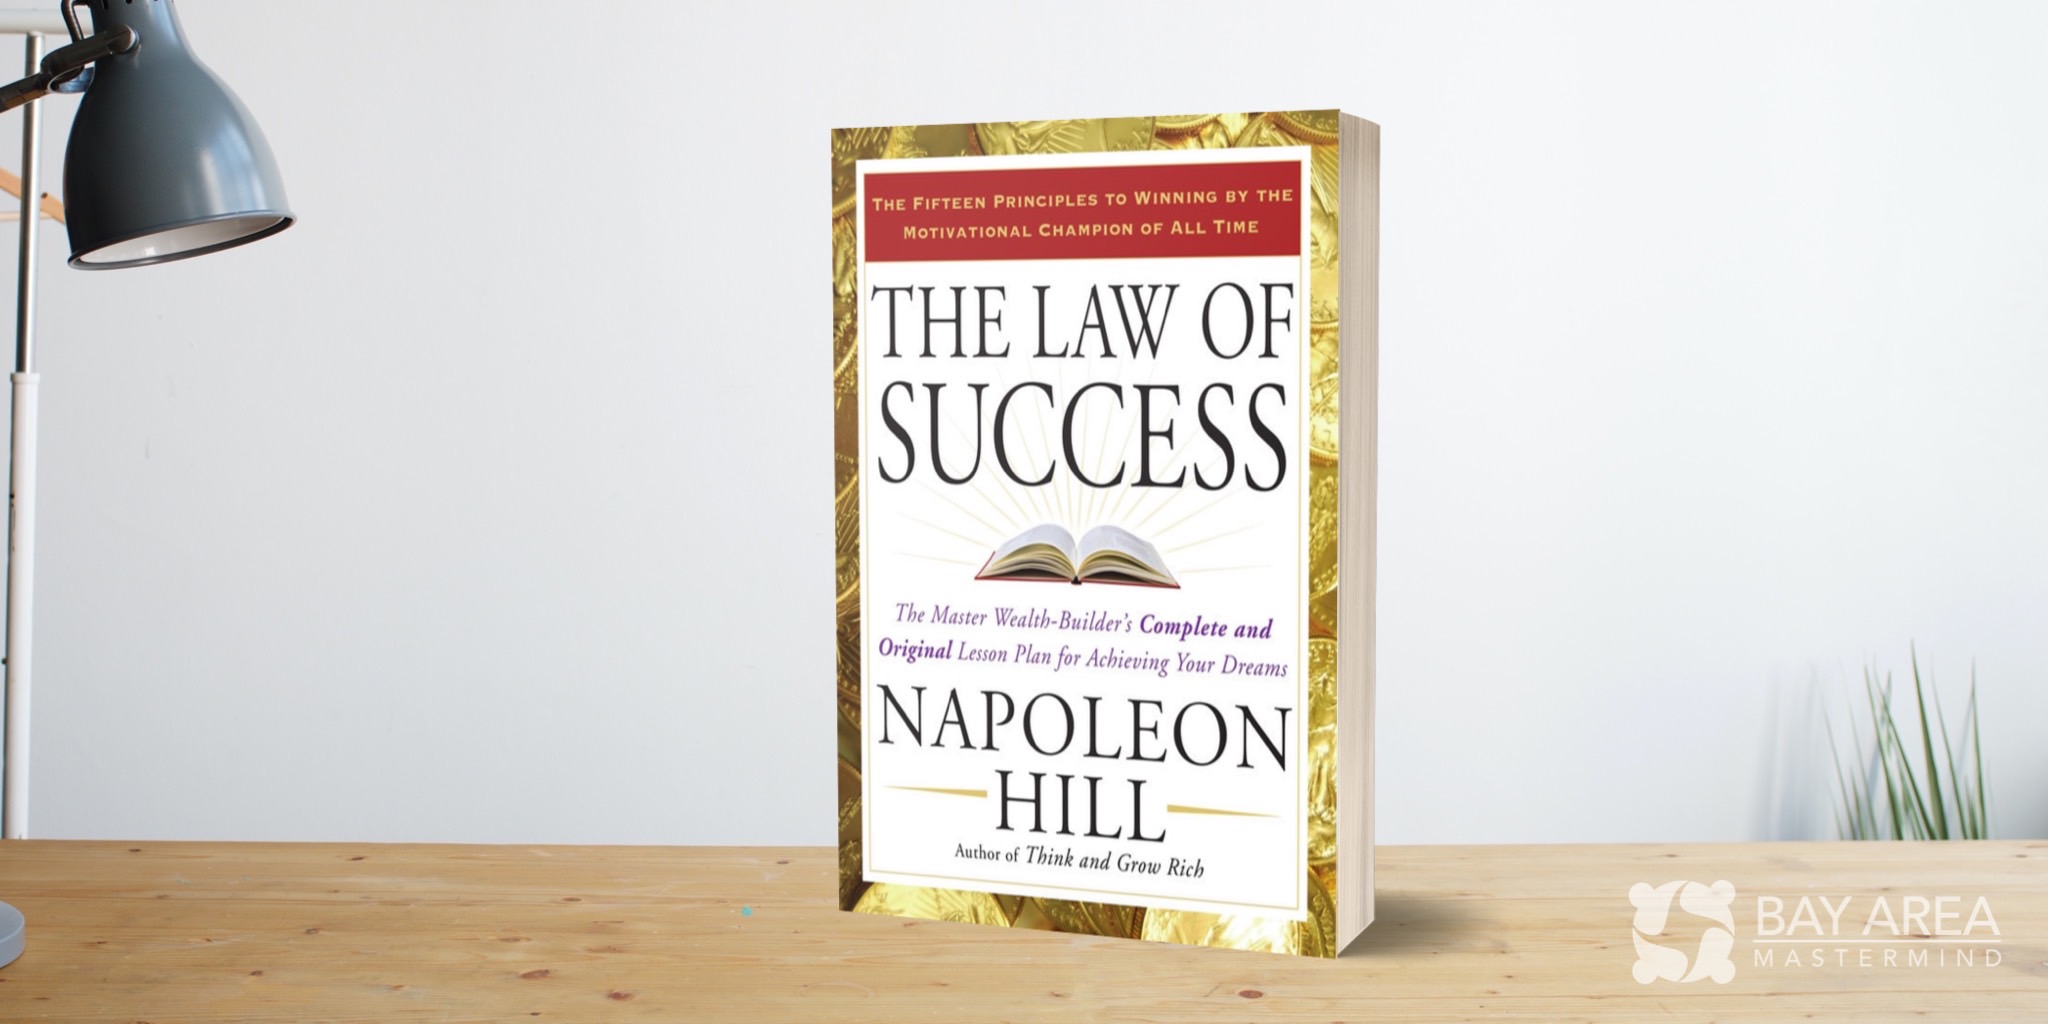 Napoleon Hill biography - interesting facts, achievements, career details